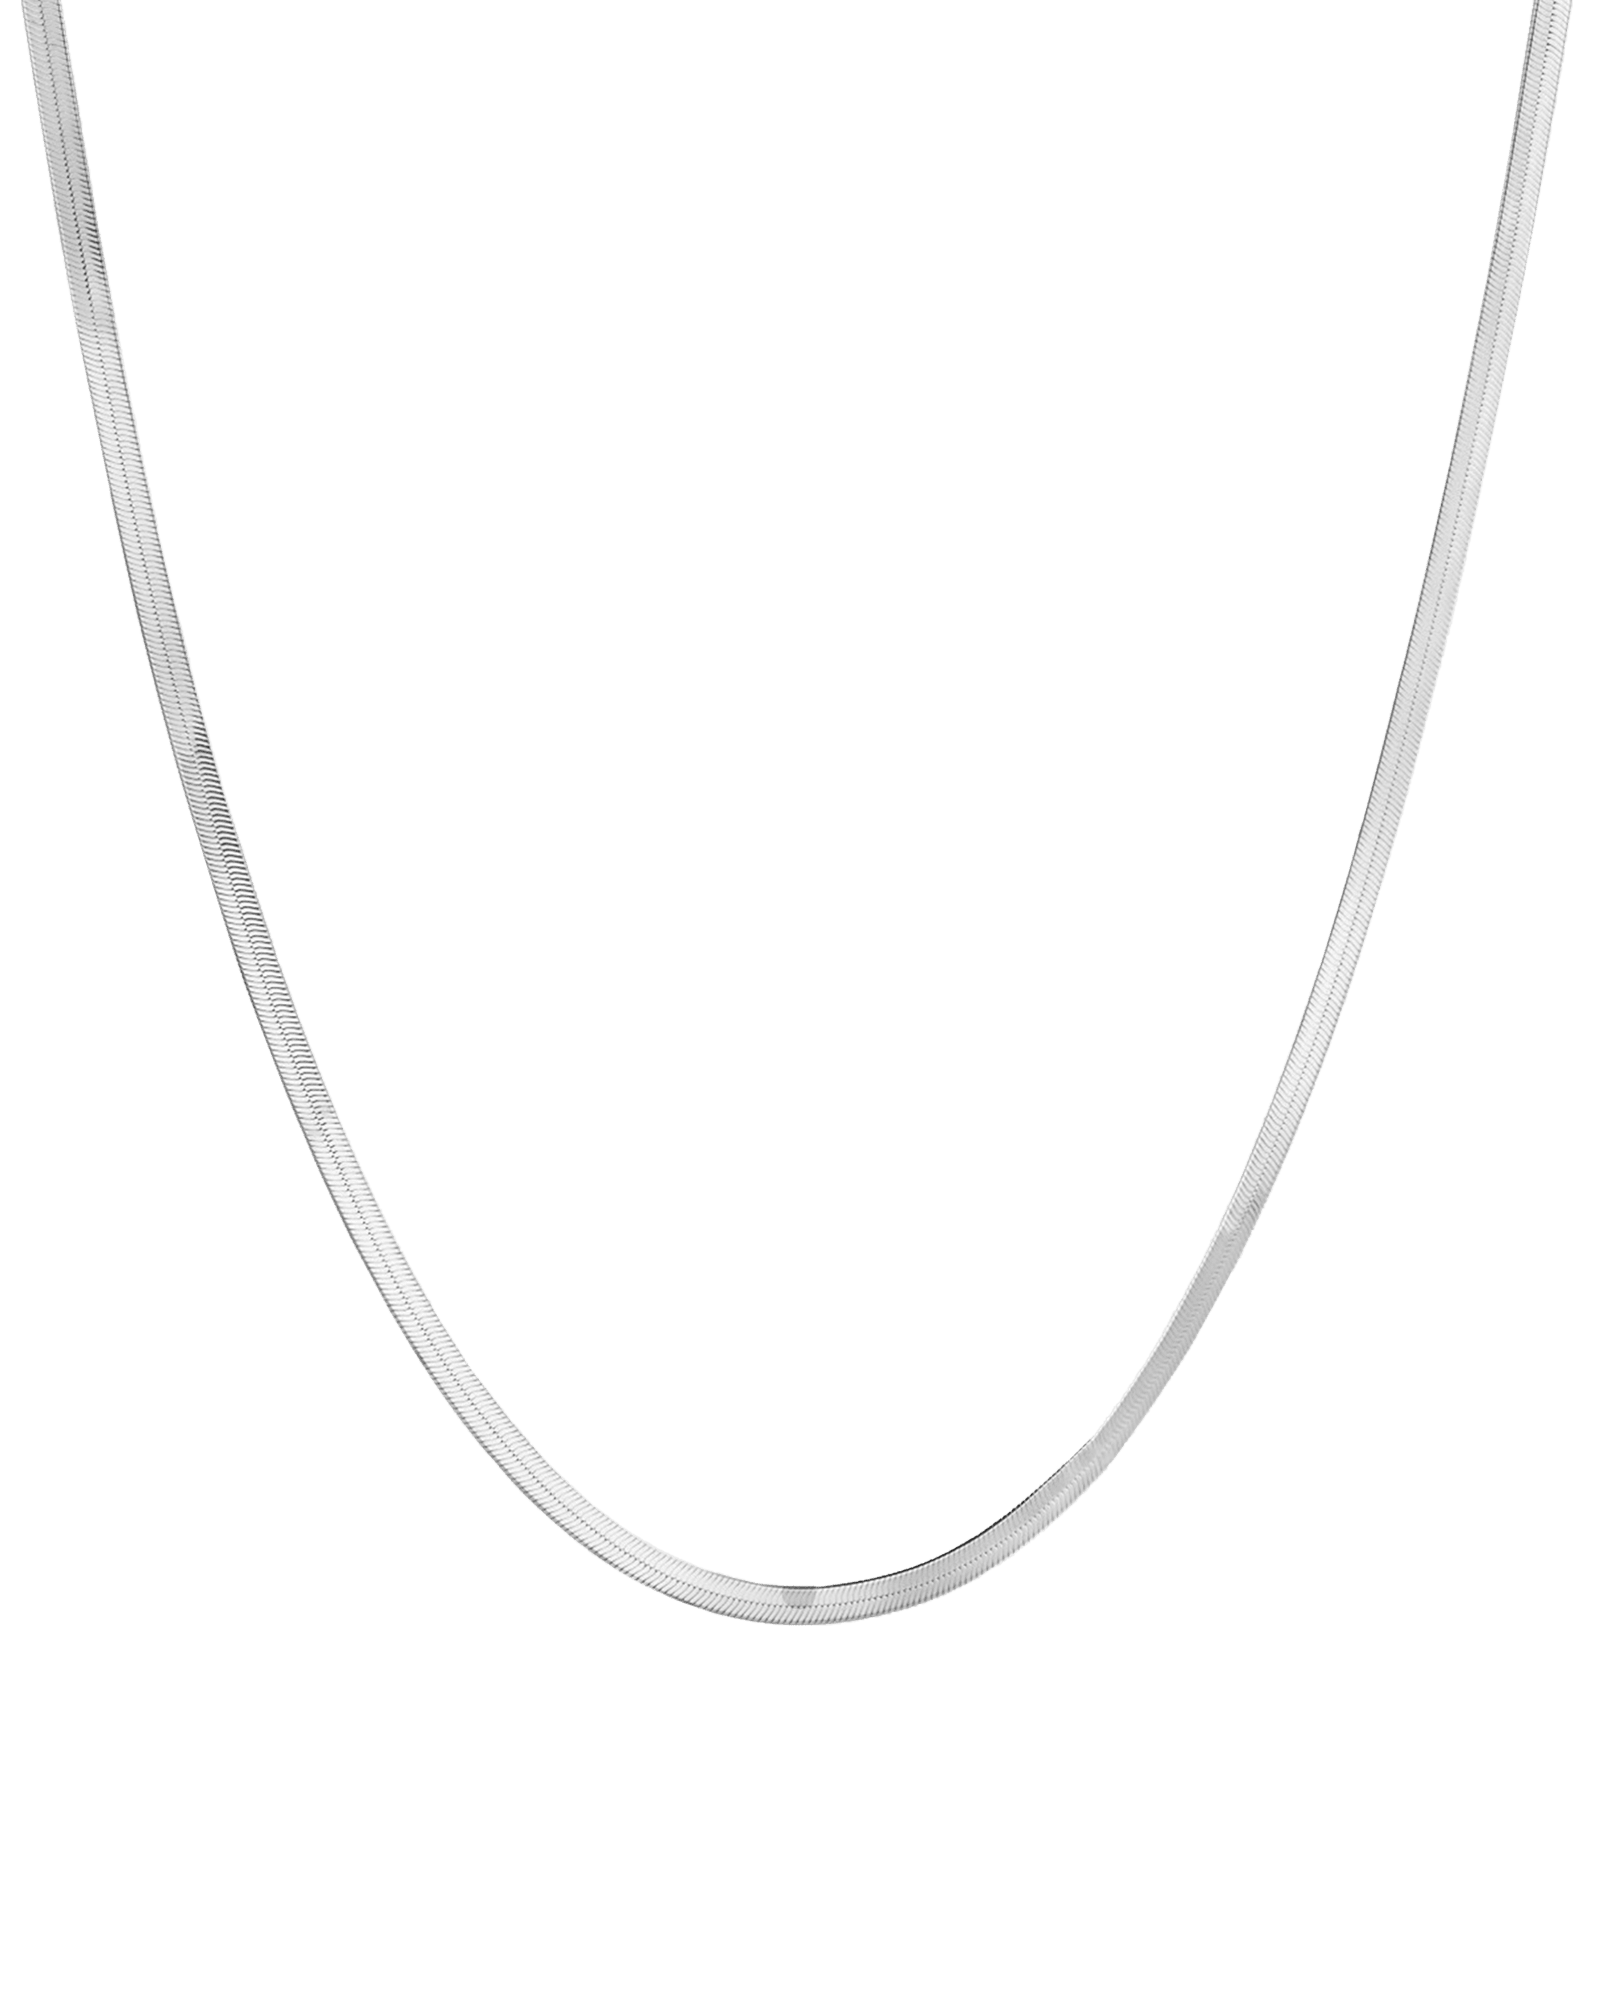 Herringbone Chain Necklace - 925 Sterling Silver Chains magal-dev 